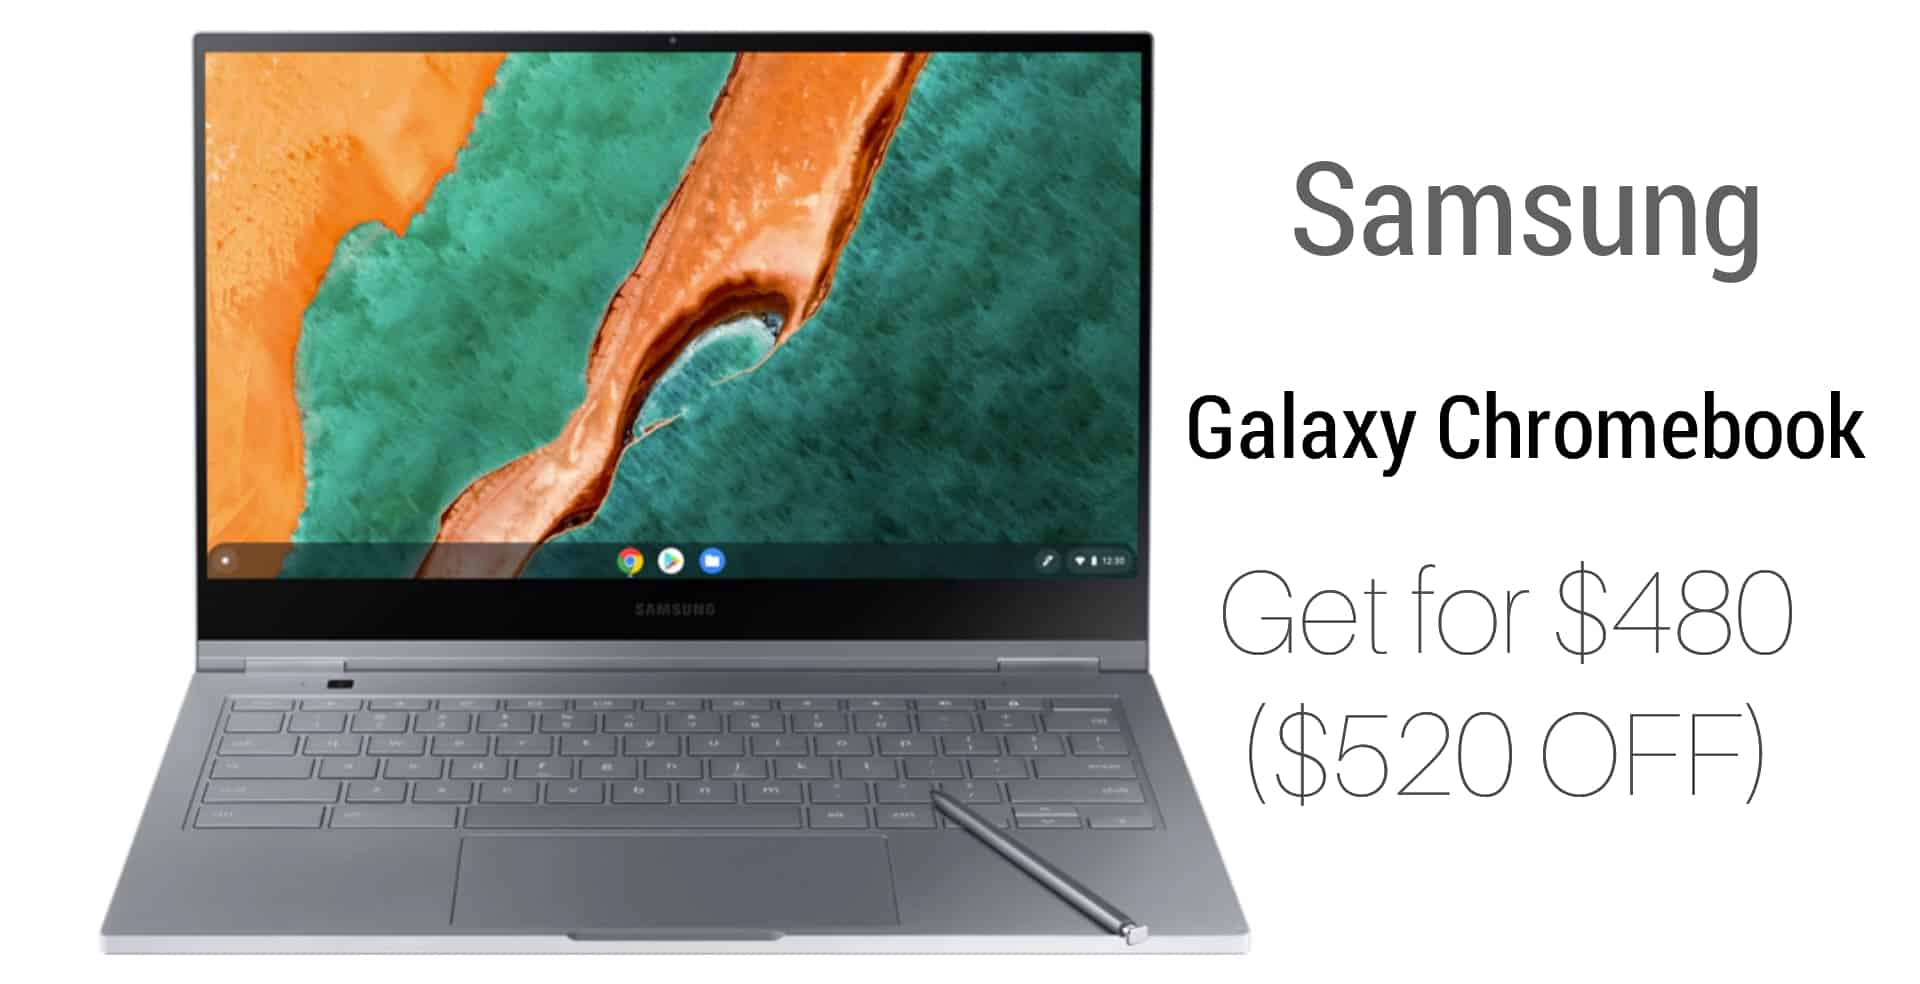 Select Shoppers Can Get the $999 Samsung Galaxy Chromebook at a Whopping $520 OFF for Just $480